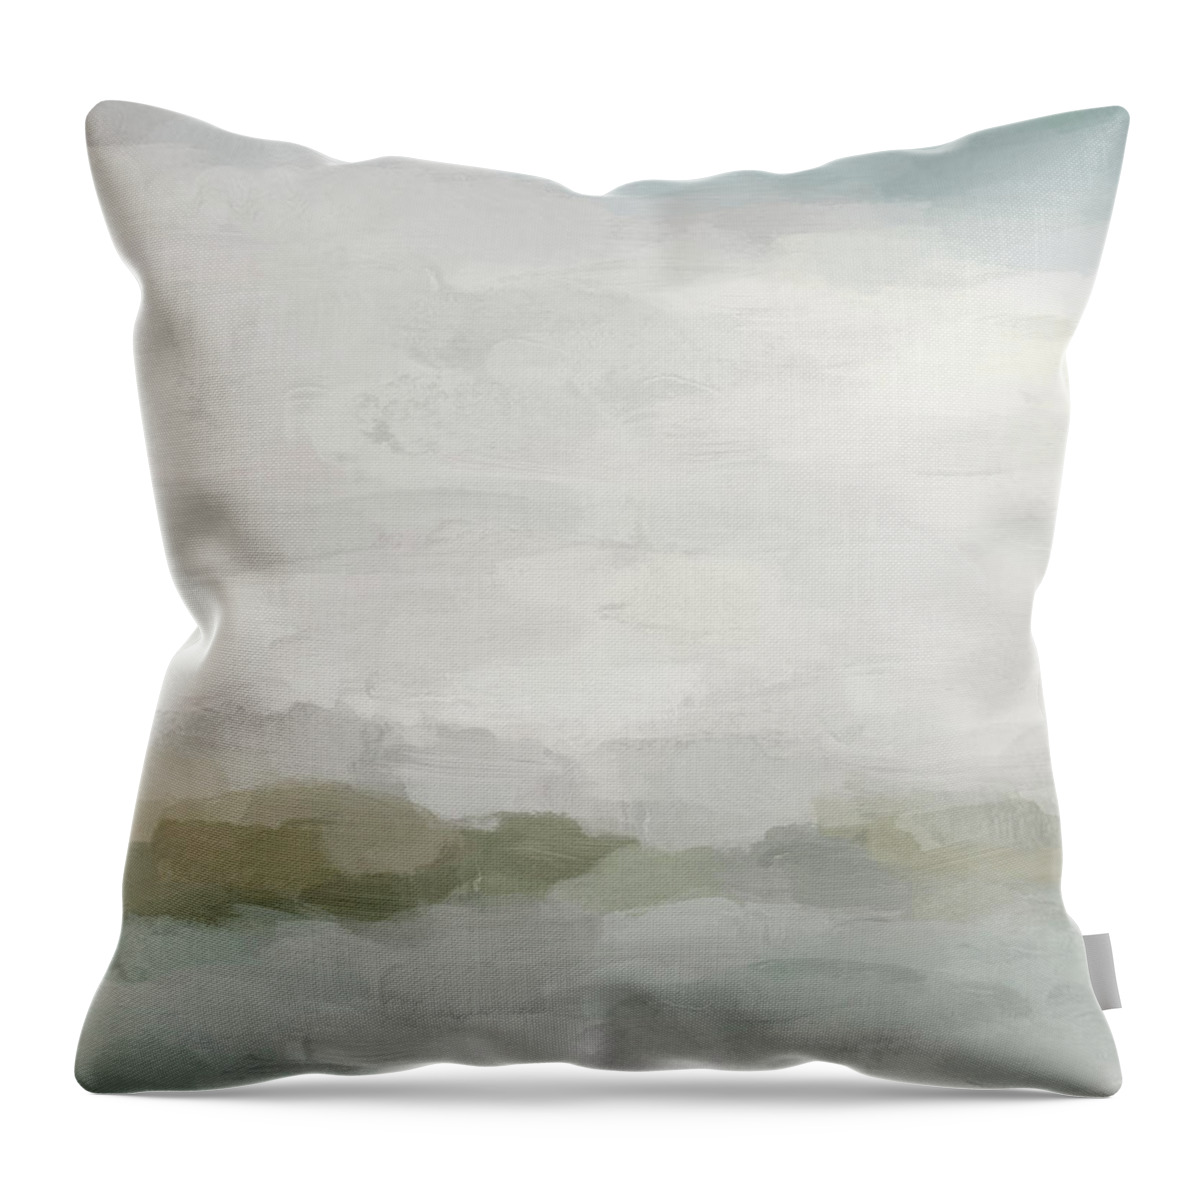 Light Teal Throw Pillow featuring the painting Break in the Weather III by Rachel Elise